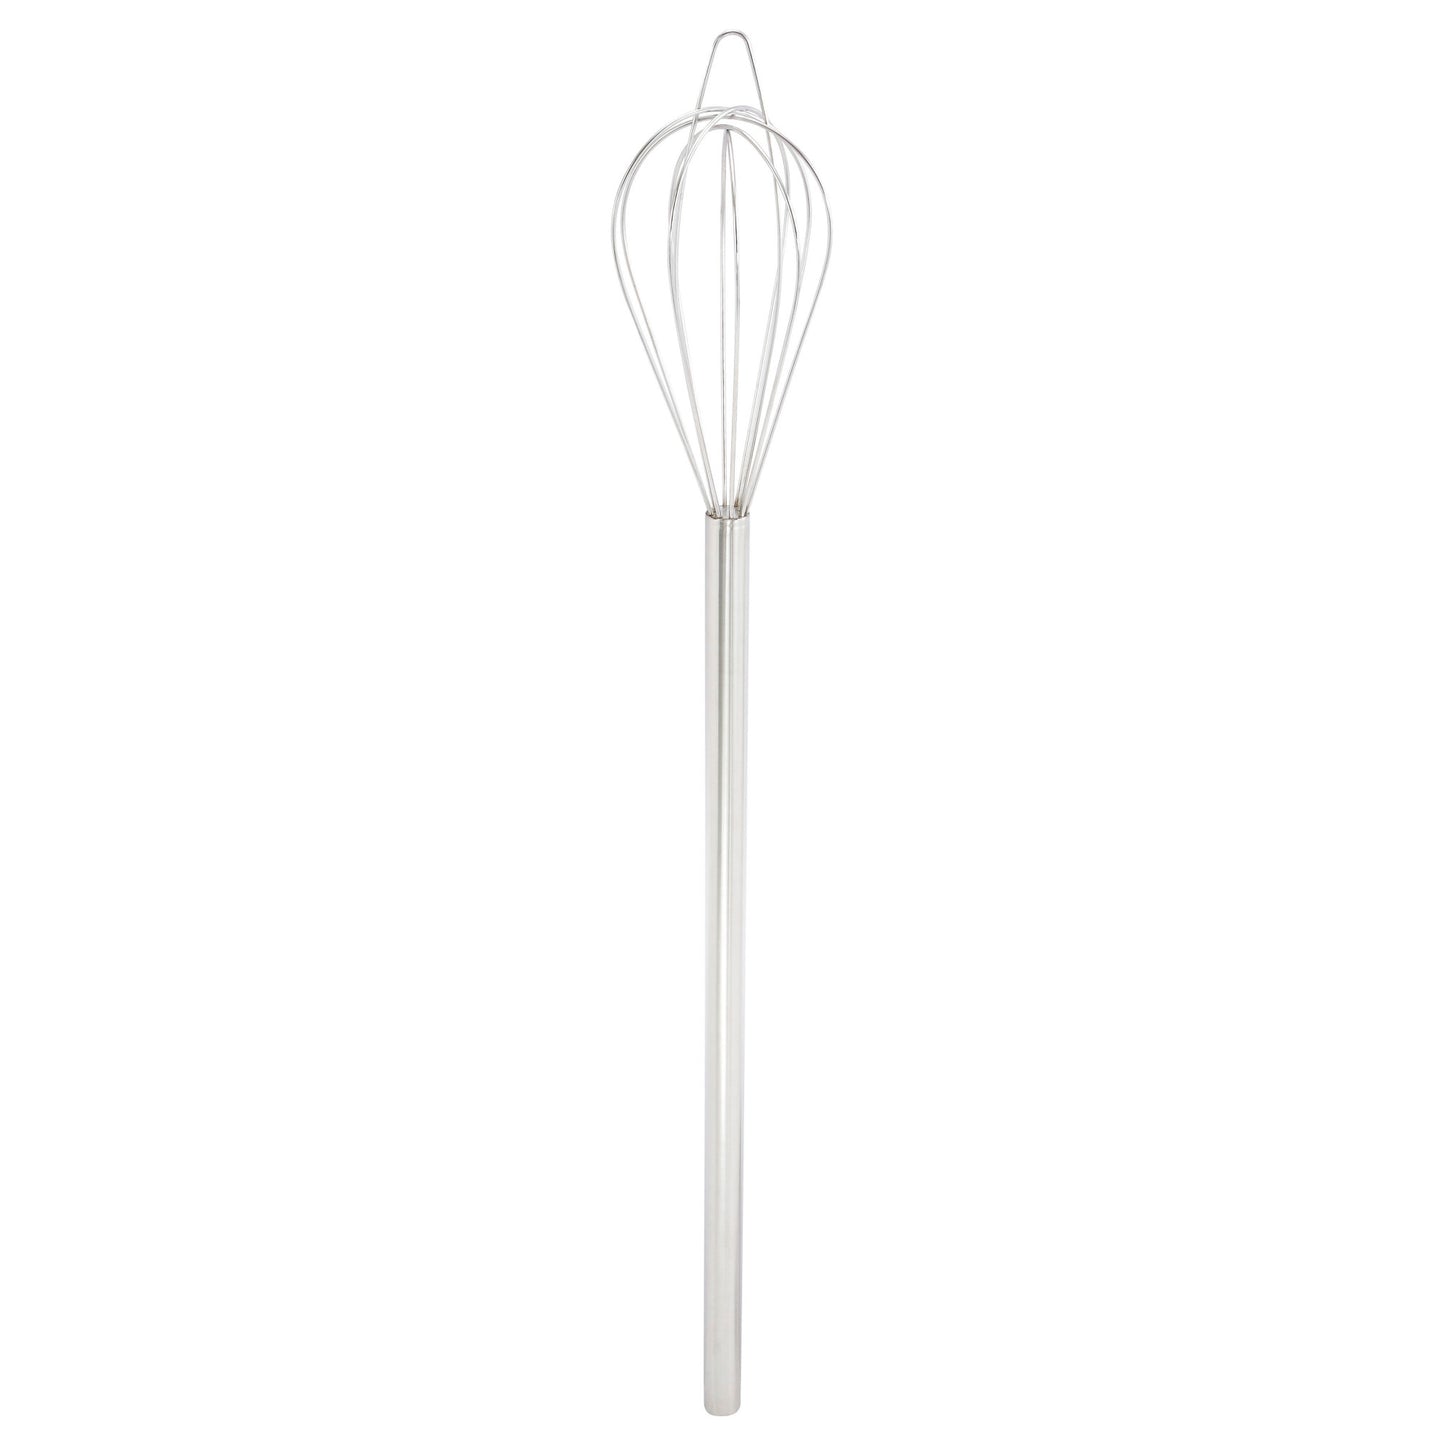 MWP-40 - Mayonnaise Whip, 40", Stainless Steel